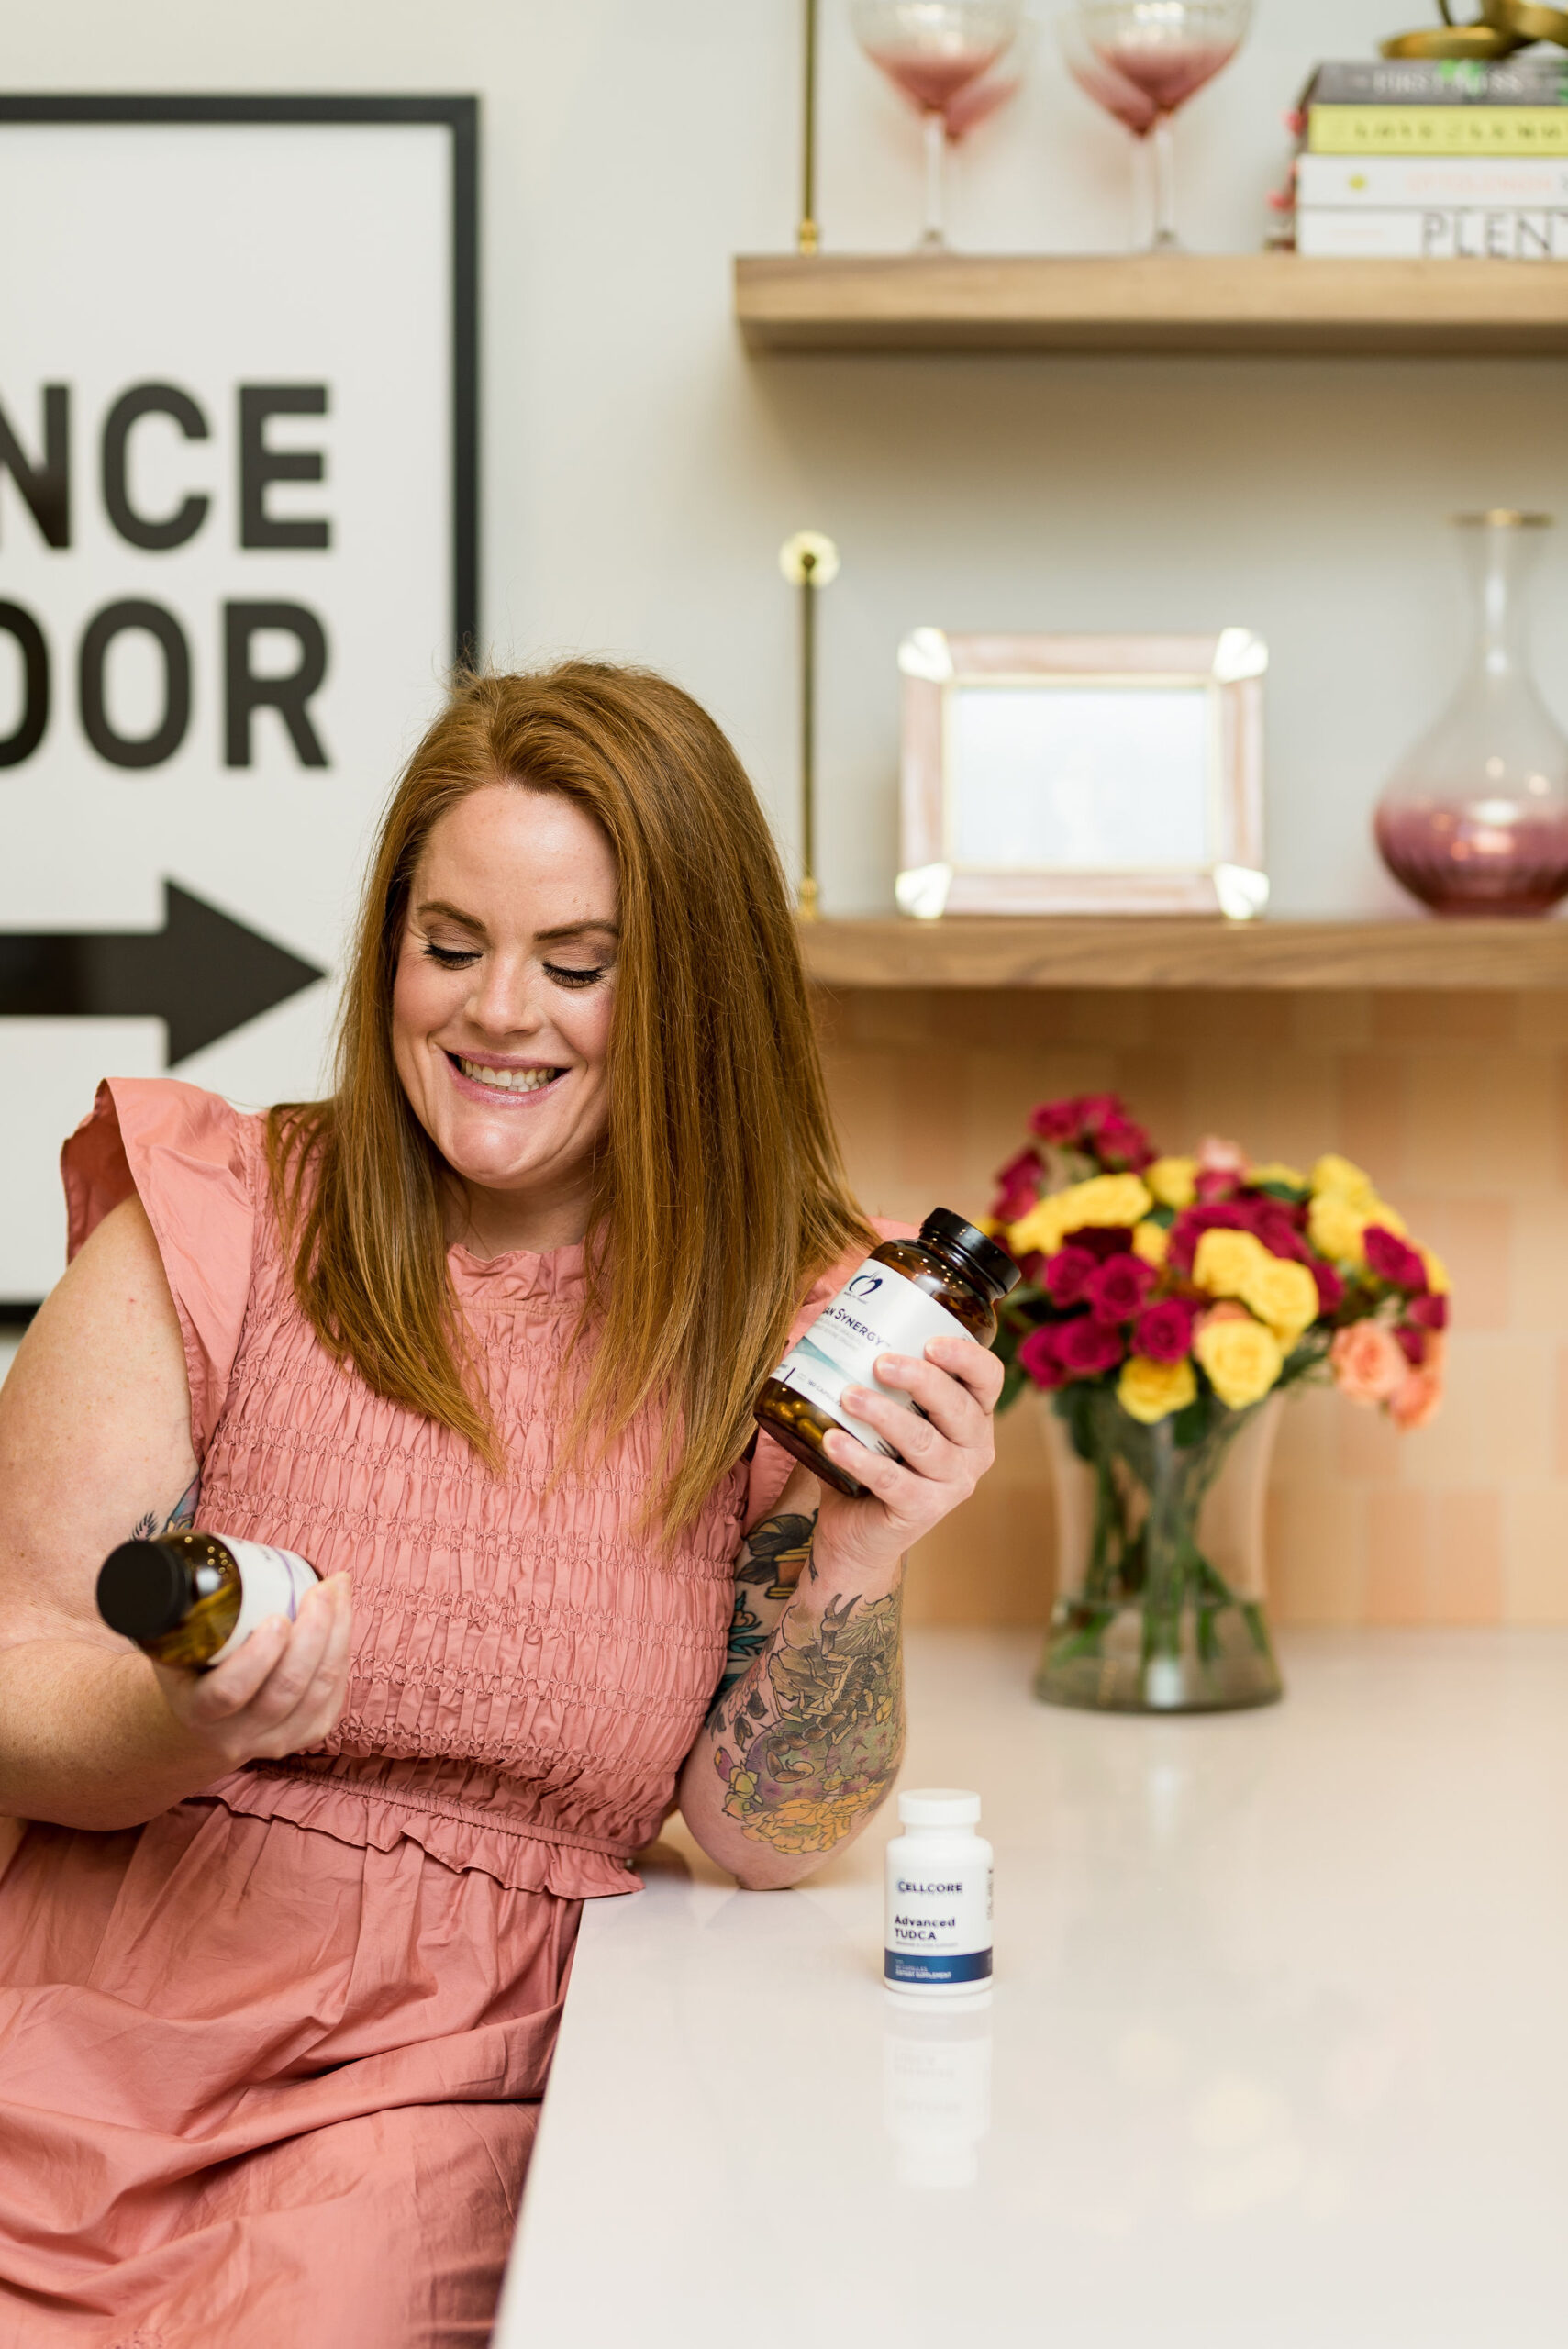 Custom brand photography for a nutritional therapy practitioner